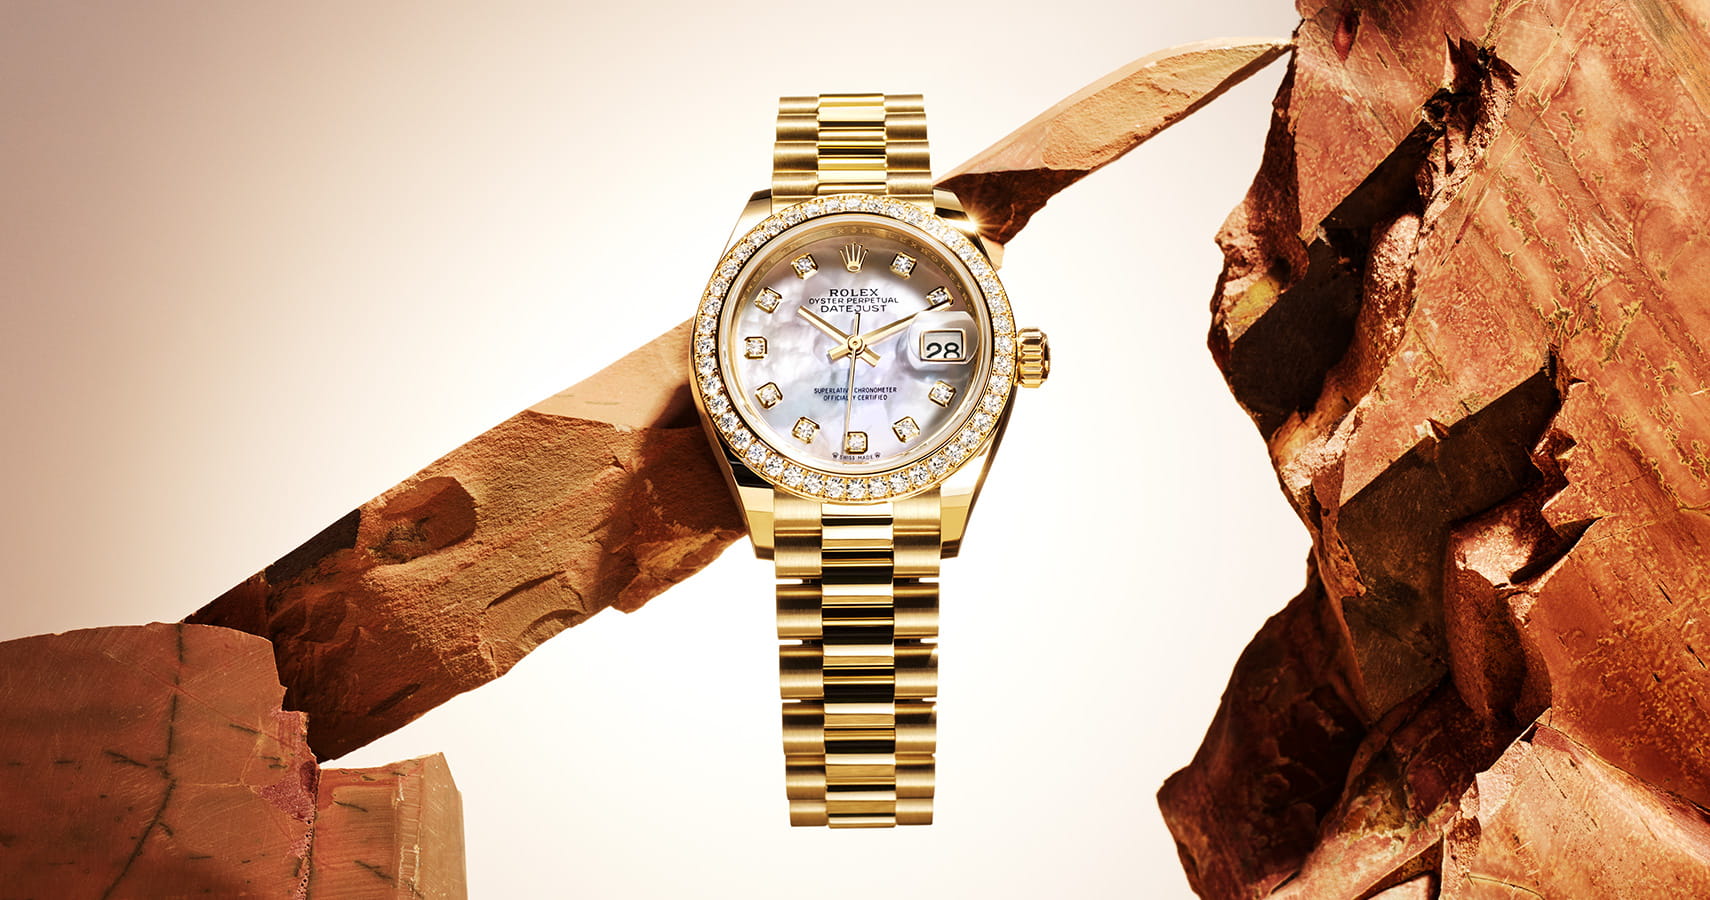 A CLASSIC TIMEPIECE, DESIGNED FOR A LADY.” オイスター パーペチュアル レディ デイトジャストを、そう表現する人がいる。